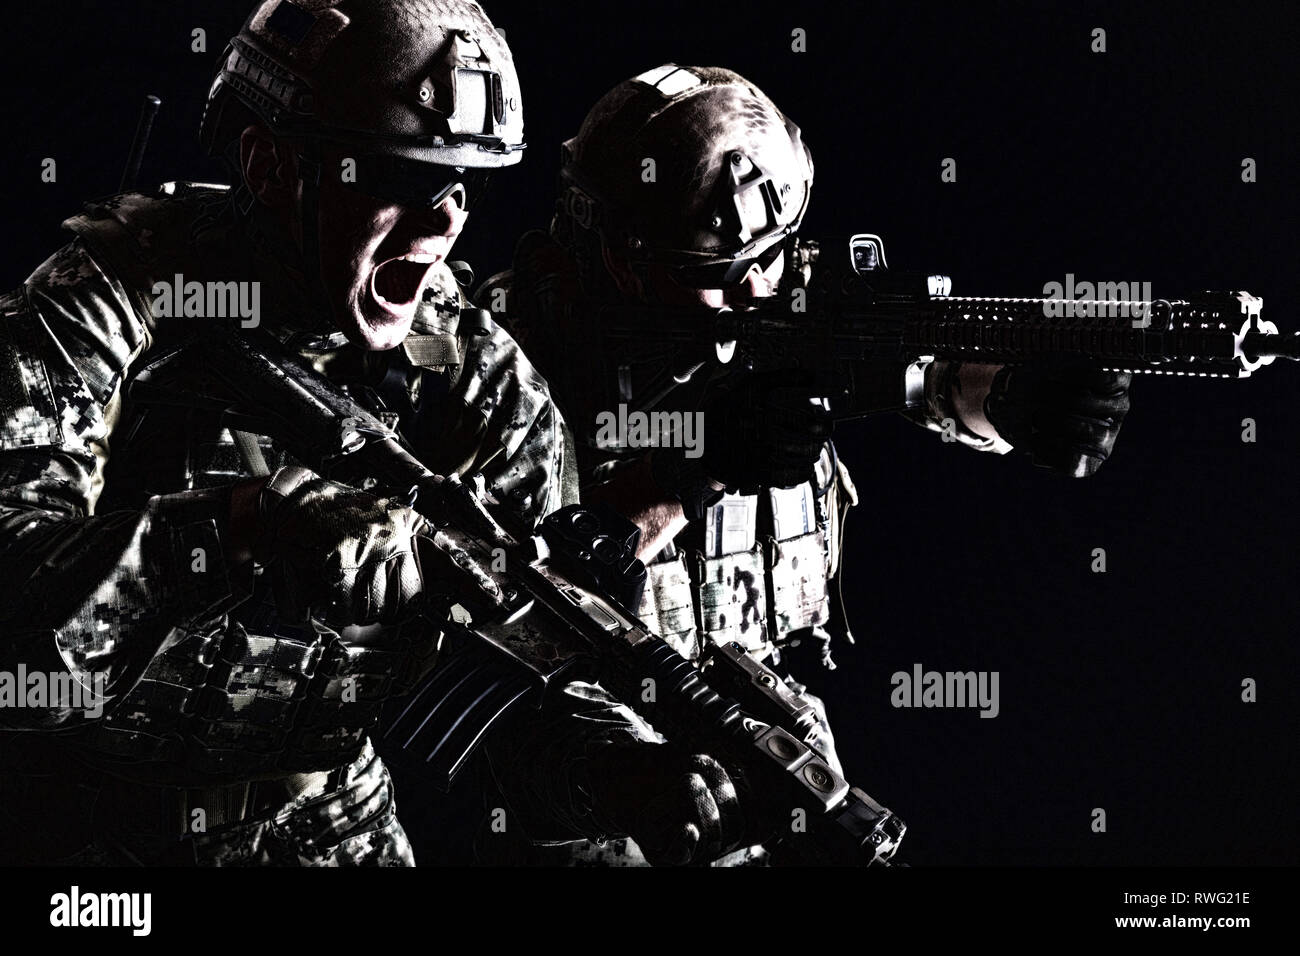 https://c8.alamy.com/comp/RWG21E/two-special-forces-soldiers-in-field-uniform-with-weapons-attacking-and-shouting-RWG21E.jpg